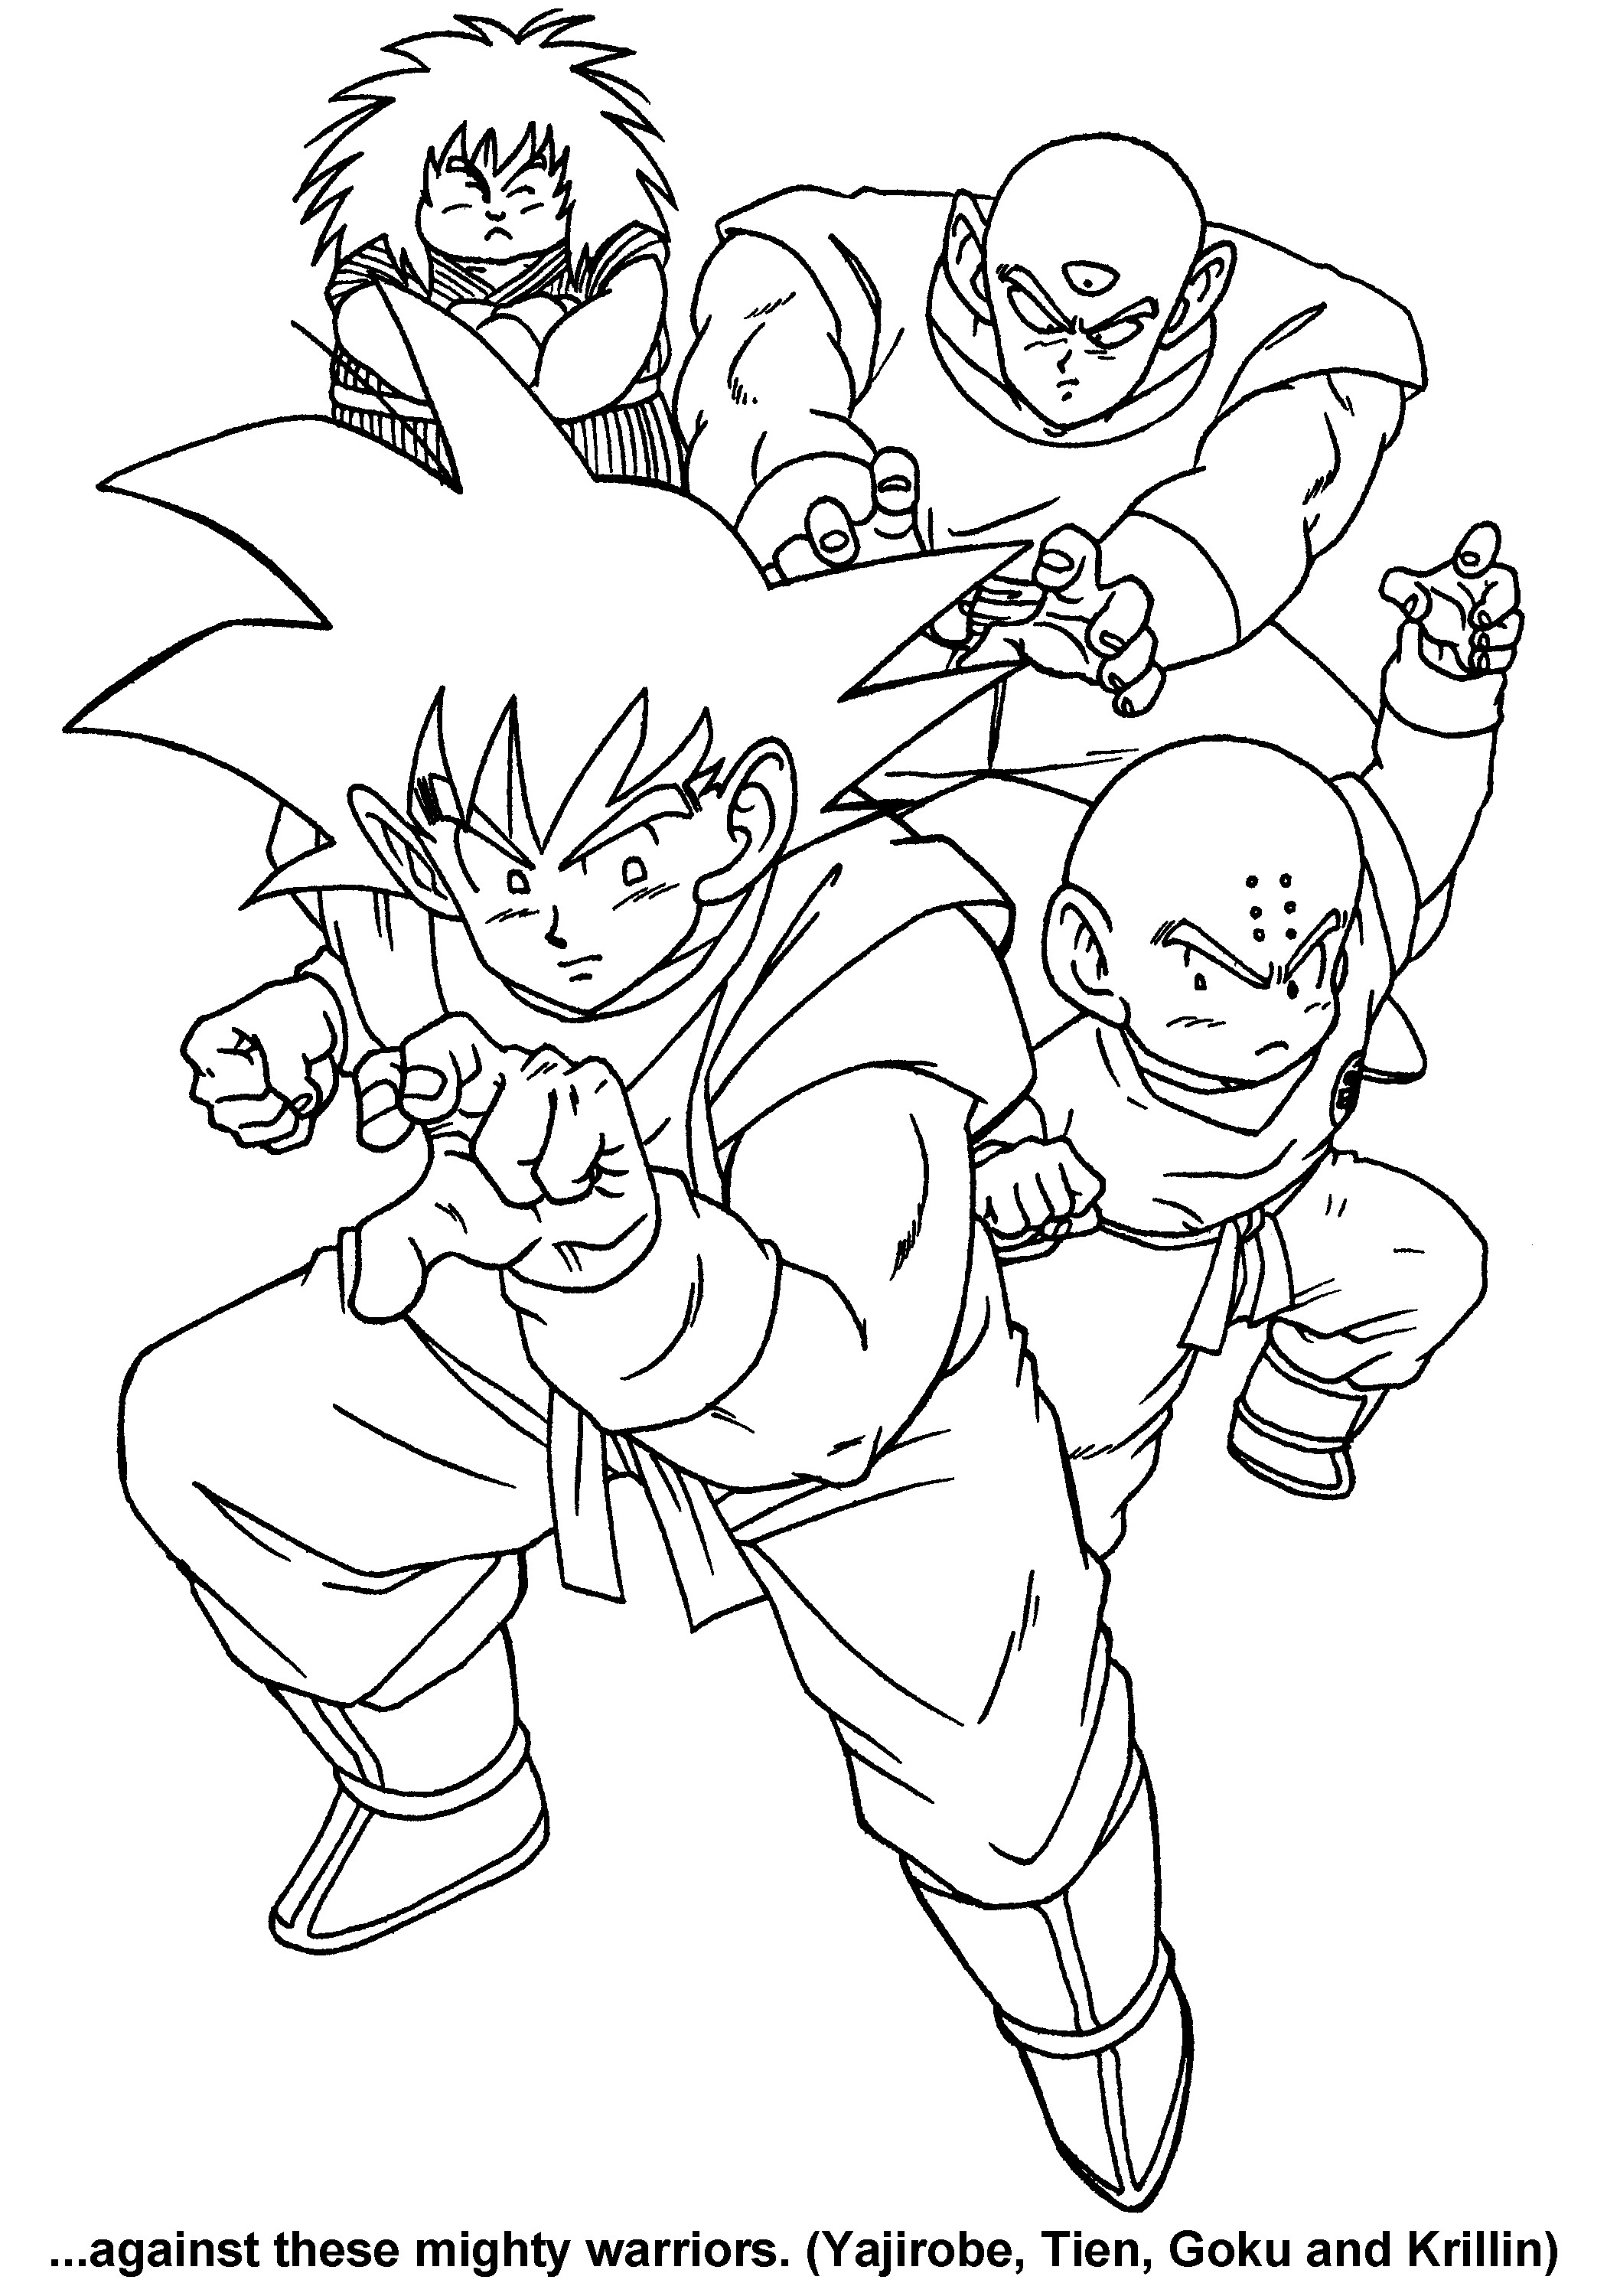 Dragonballz Coloring Pages
 Dragon ball z Coloring Pages